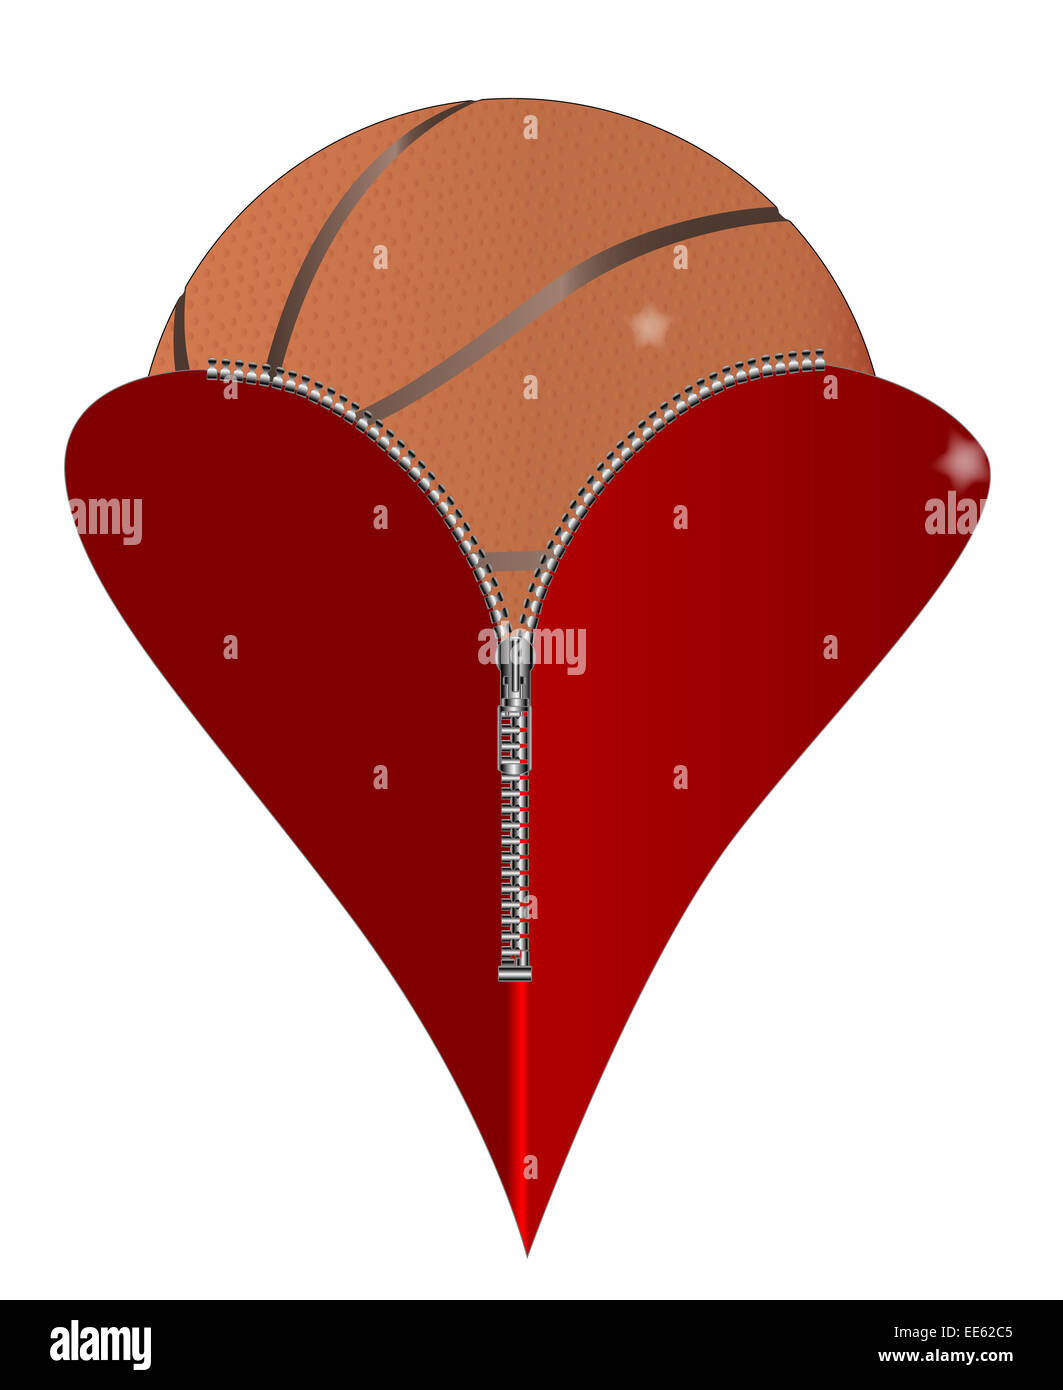 A red heart with a zipper showing a basketball rising from within Stock Photo